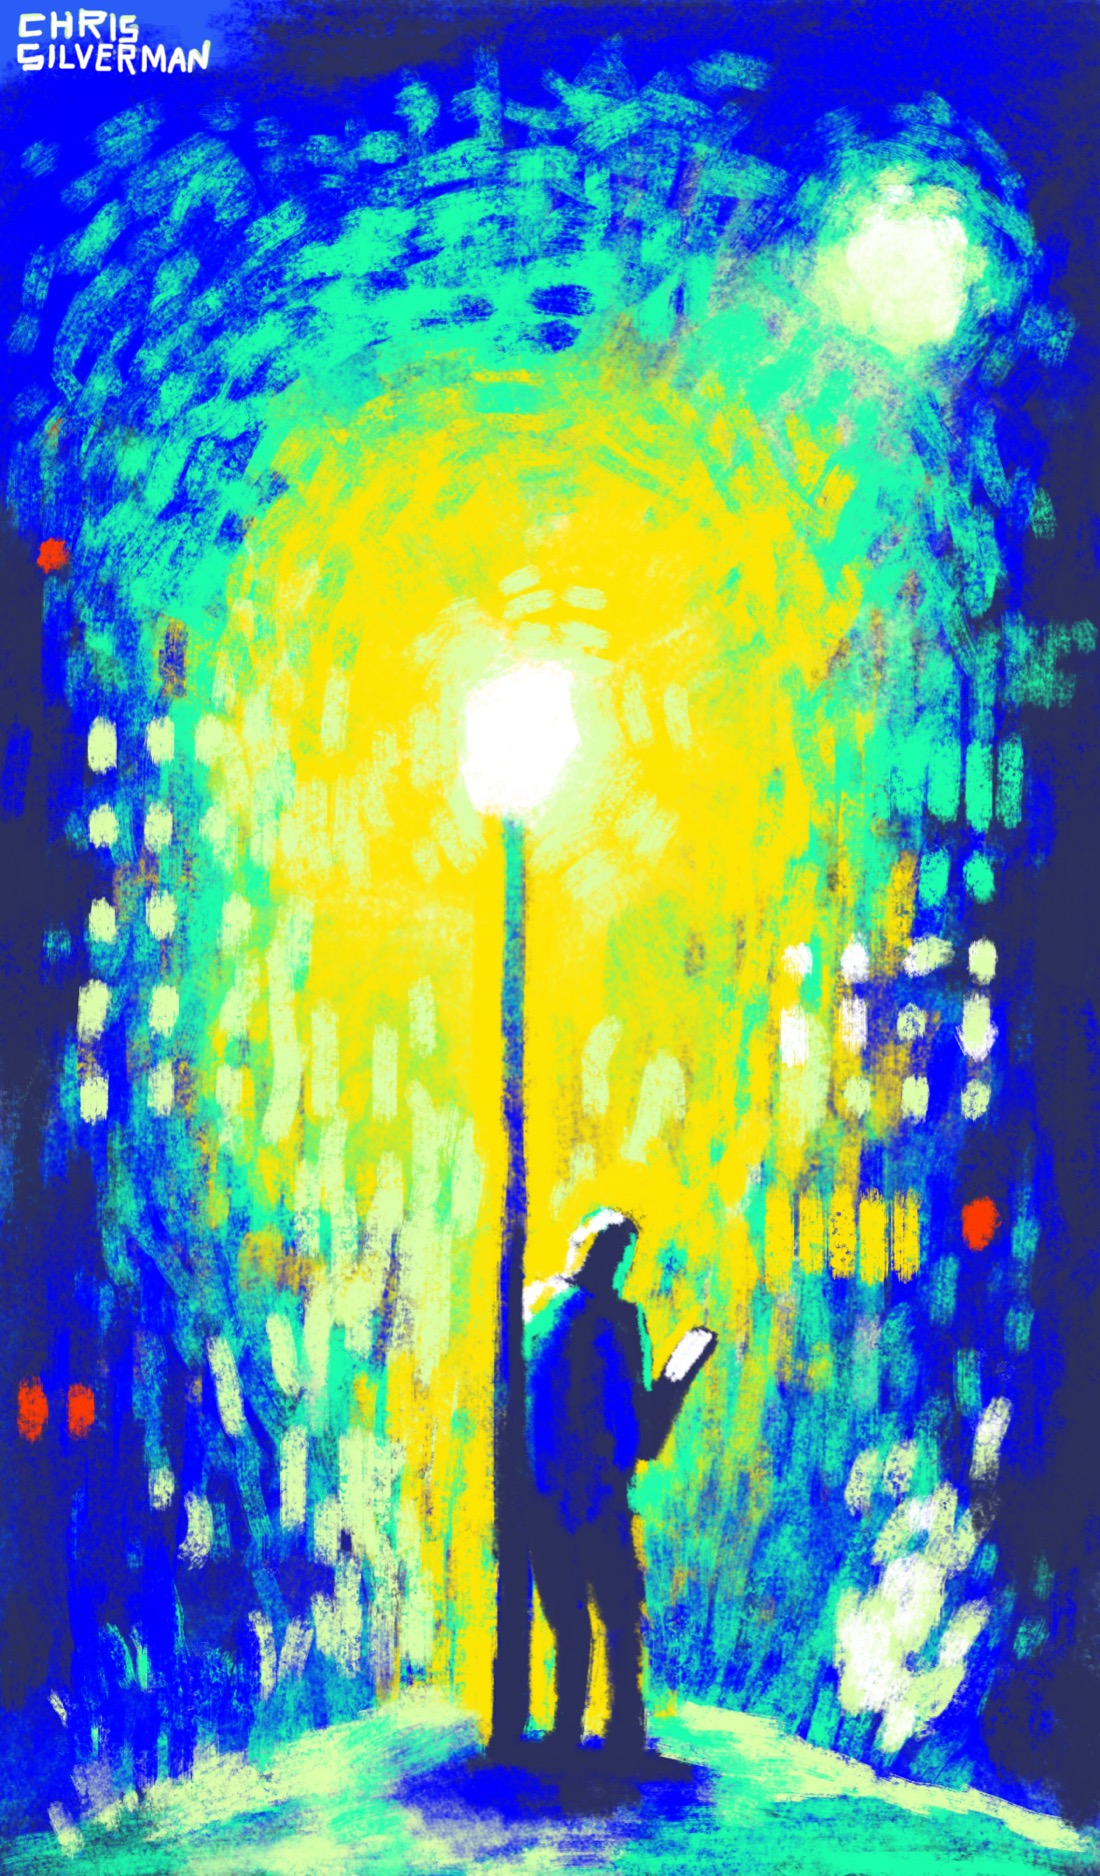 A person stands under a streetlight, holding a phone. The streetlight looks like it may be placed in a city park at night. The scene is rendered in an impressionist style; the light is surrounded by a blast of yellow, neon green, and white. The glow is rendered in thick brushstrokes. Behind the light is the suggestion of a deep blue night, and symmetric rows of lights suggesting buildings. There are a few bright red dots that might be traffic lights or warning lights on buildings. In the top right is a smaller glowing object that could be the moon.